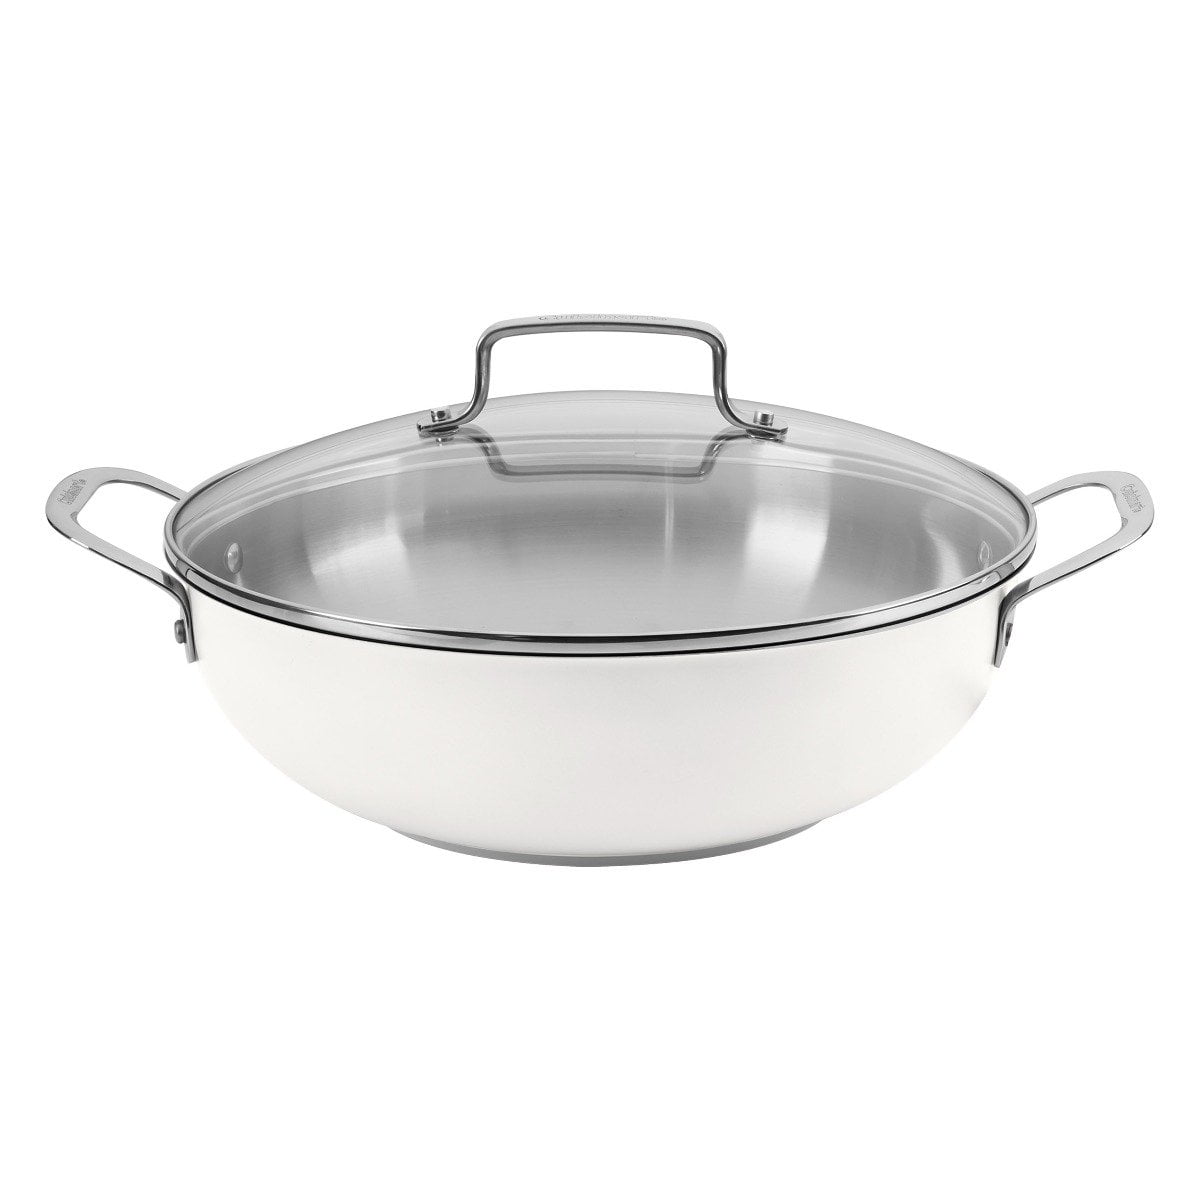  DELARLO Whole body Tri-Ply Stainless Steel 12 Inch